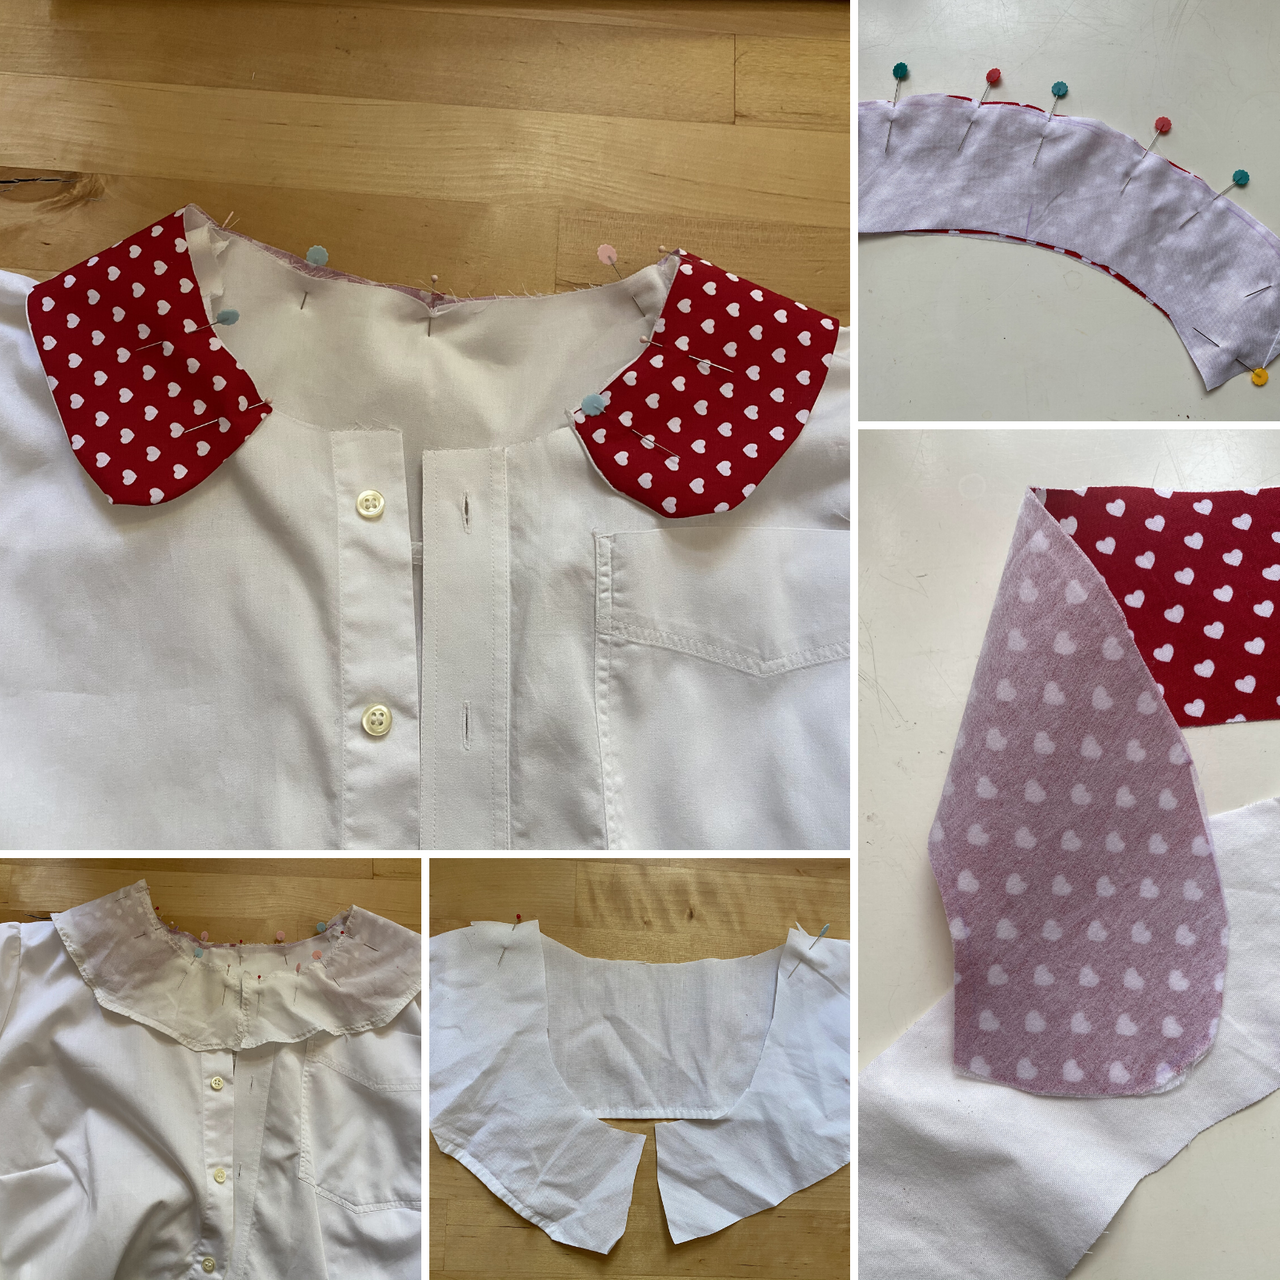 several steps how to attach a Peter pan collar and interfacing on a handmade blouse